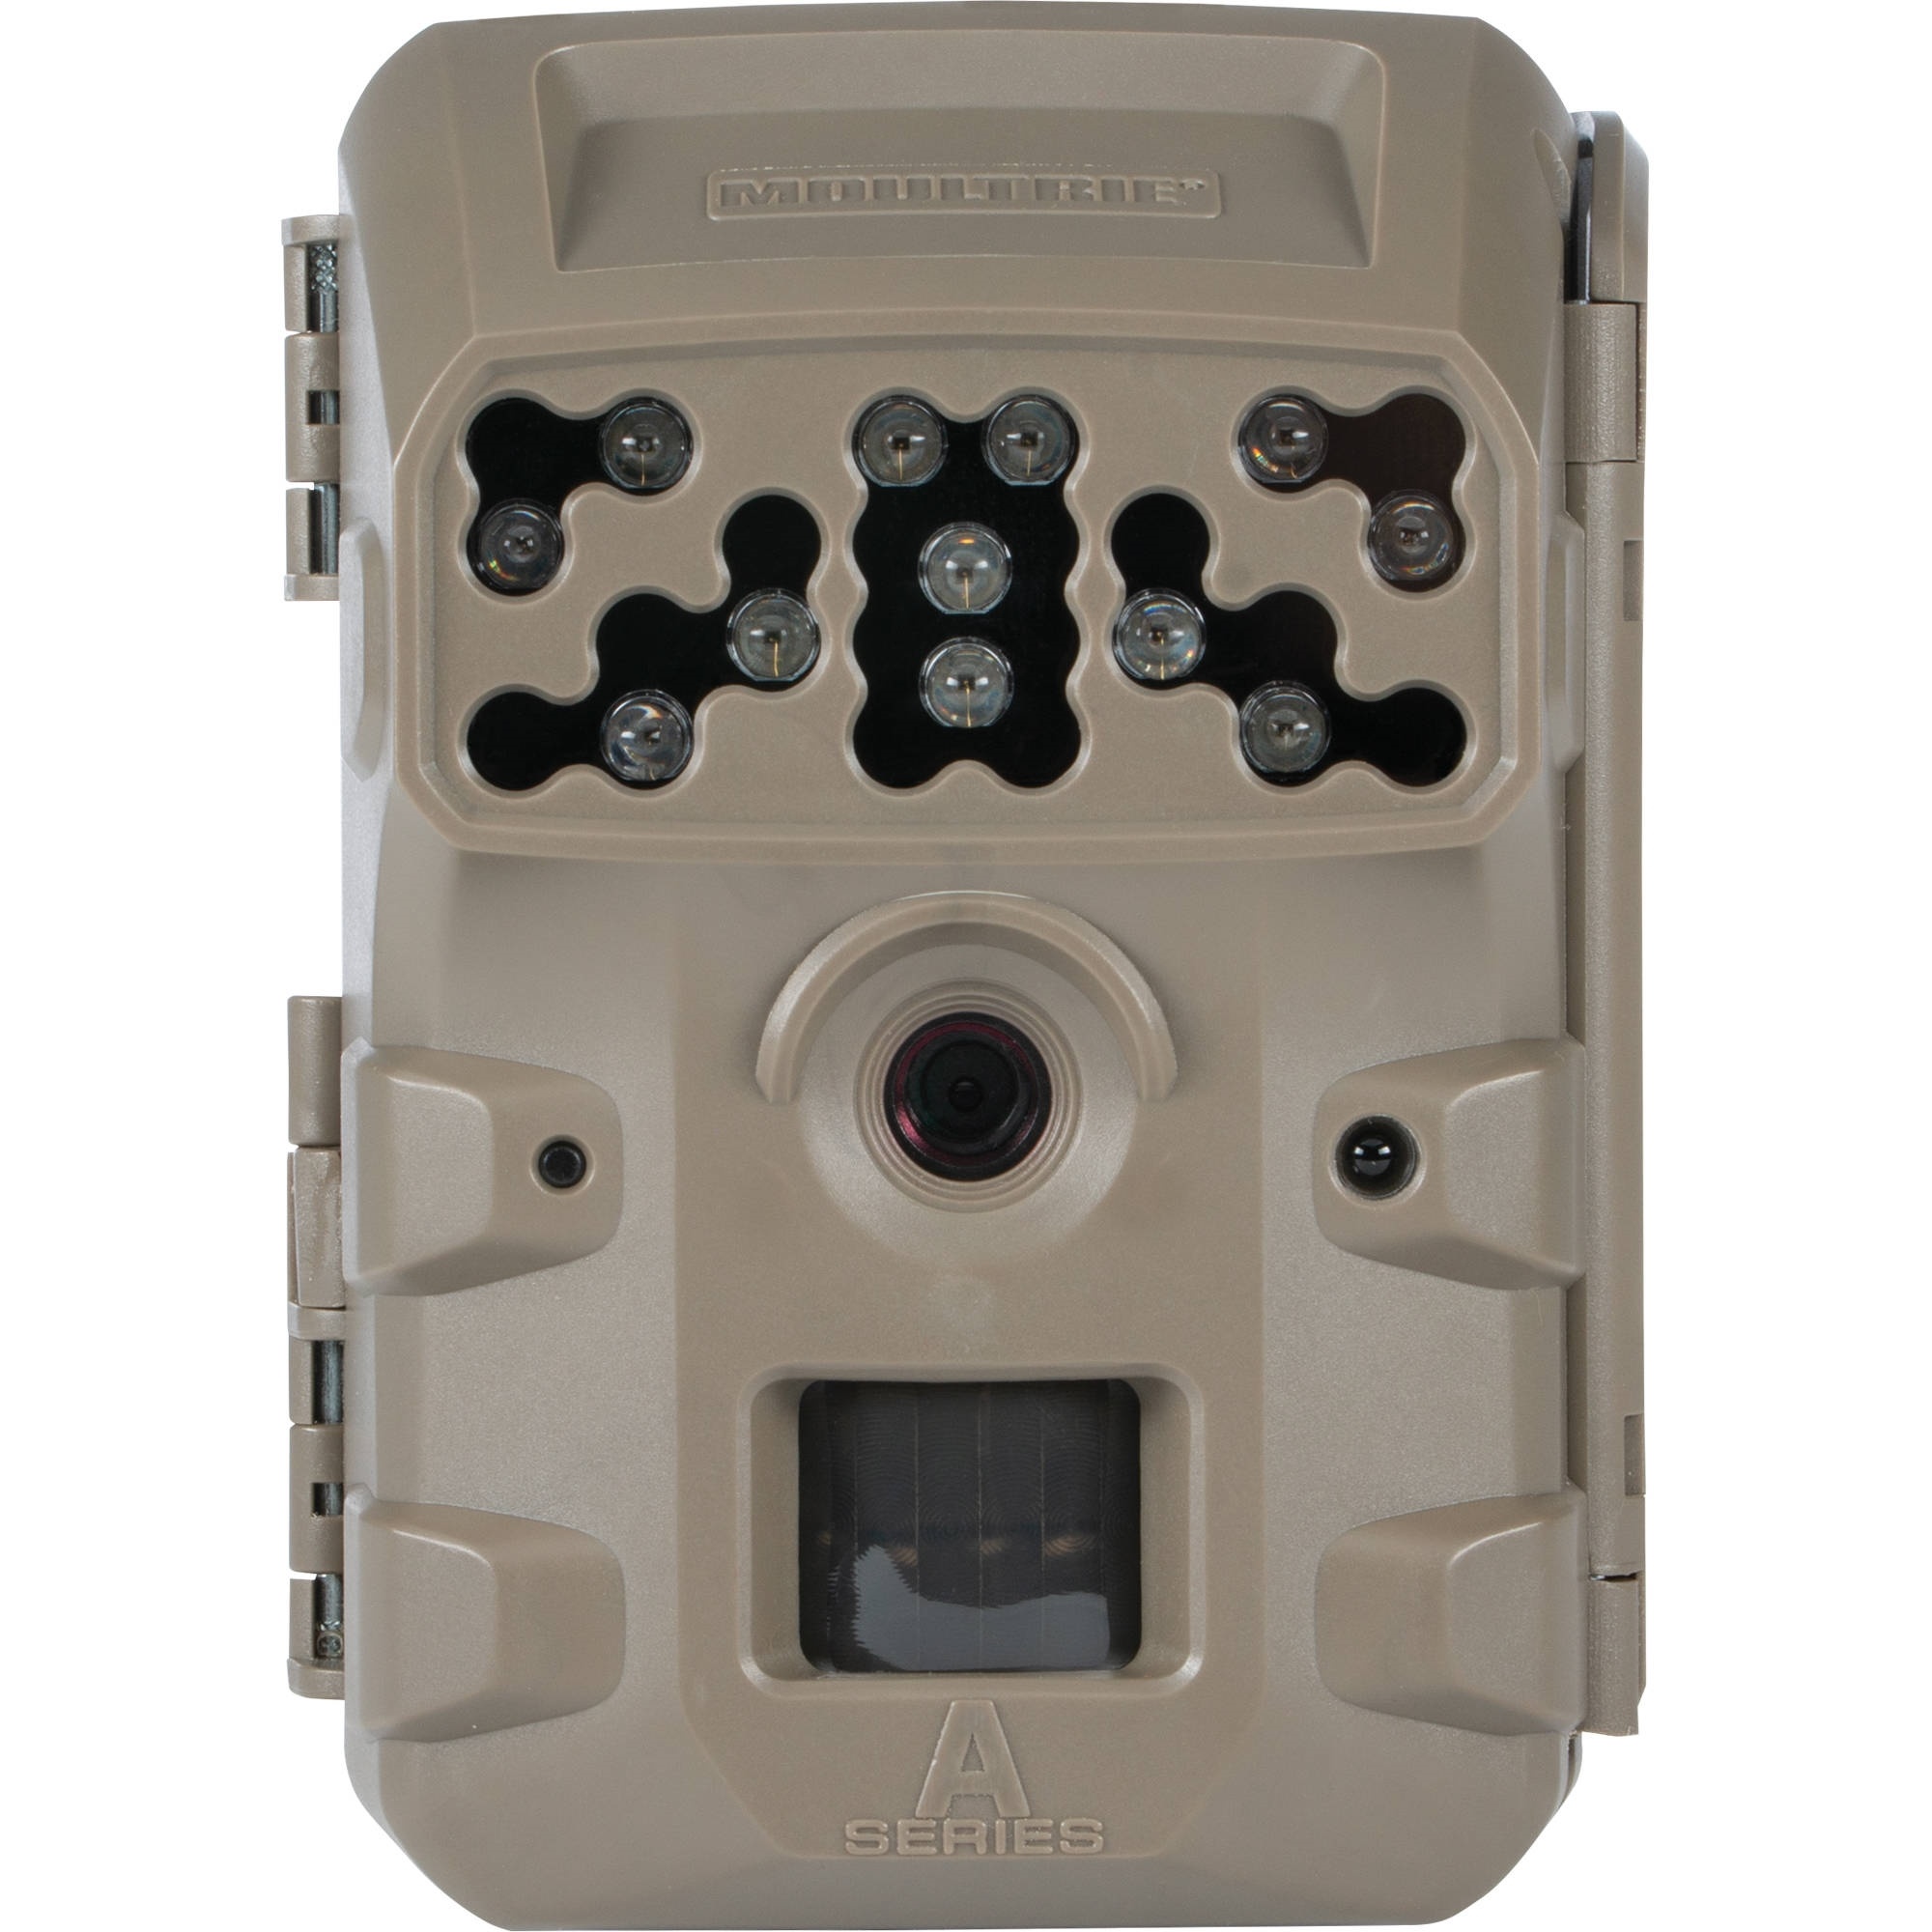 Moultrie A-300 Trail Camera (Brown)